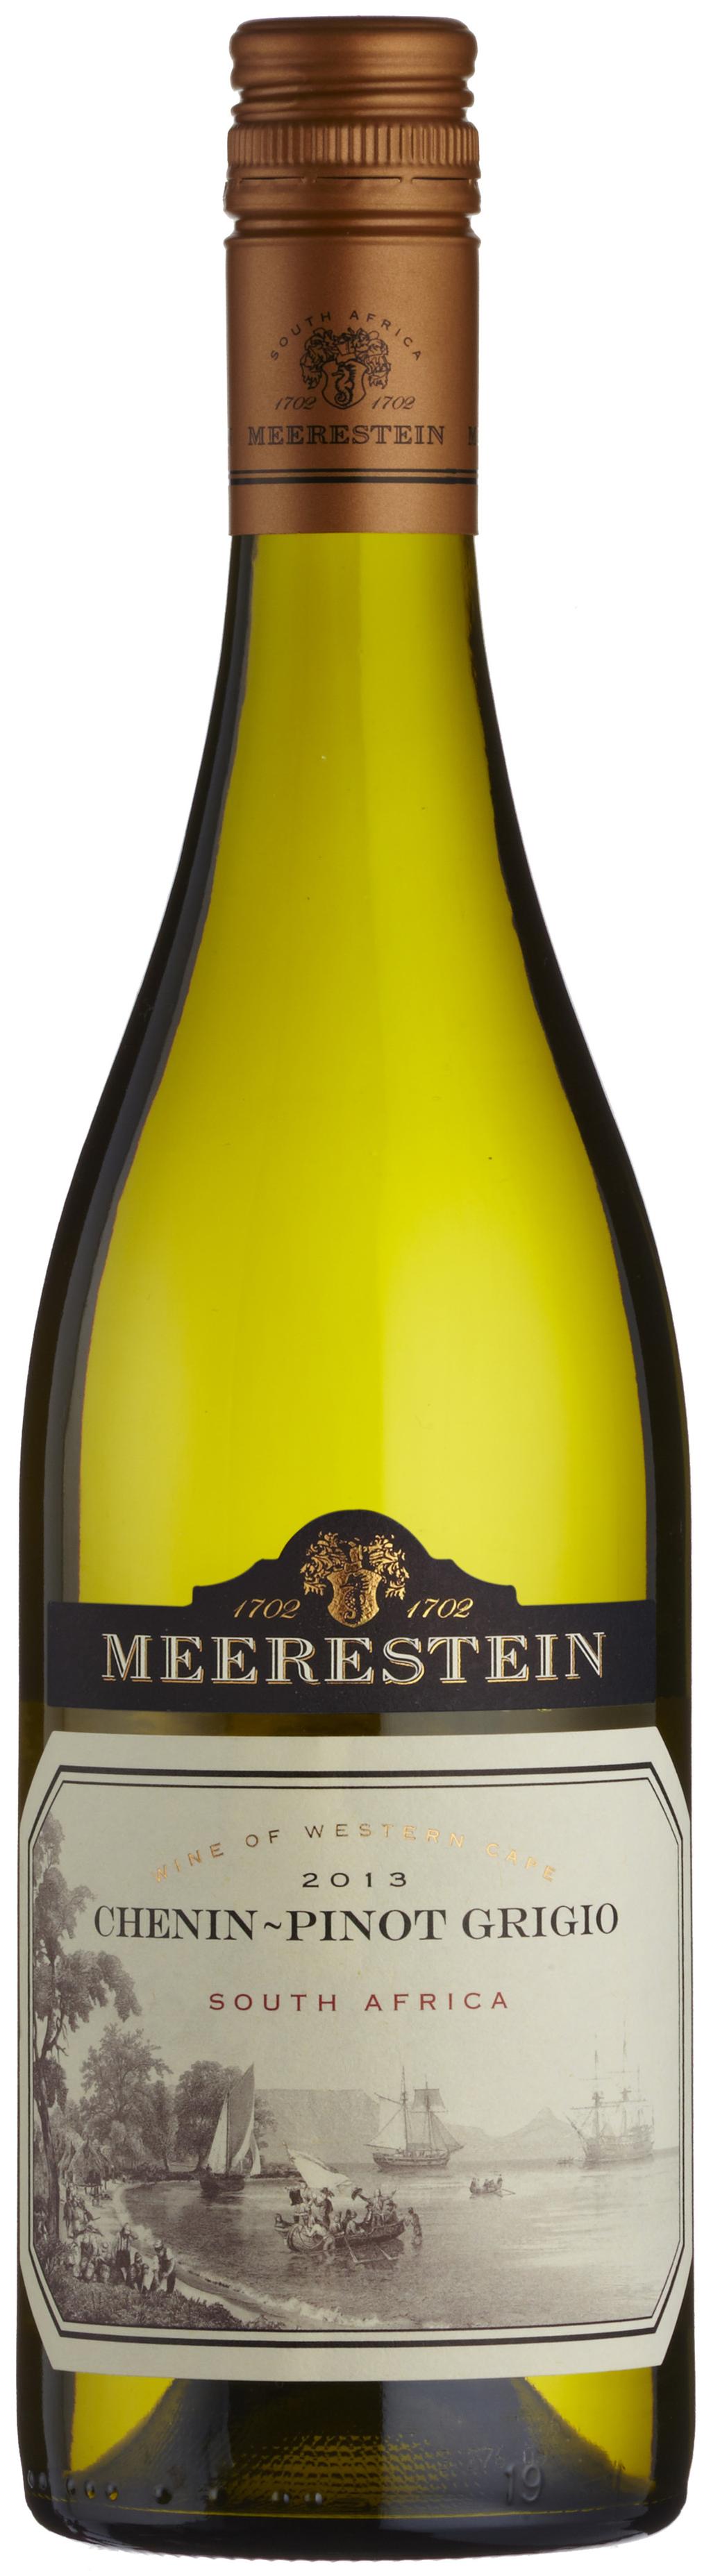 Recommendations of the house Meerestein, Chenin Blanc/Pinot Grigio, South Africa Round